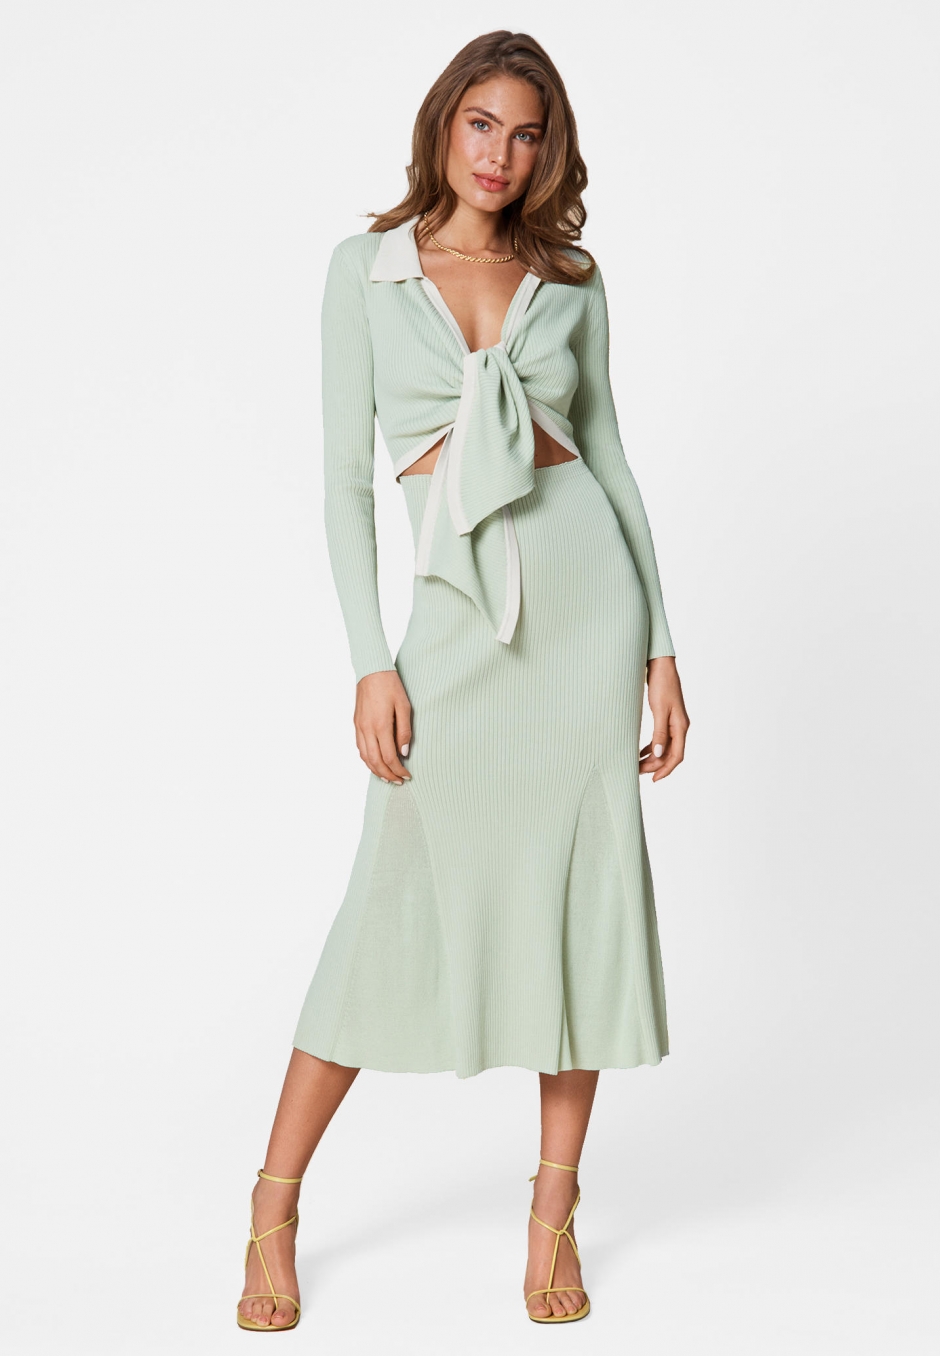 Adoore Knitted Riviera Dress Pistage Green